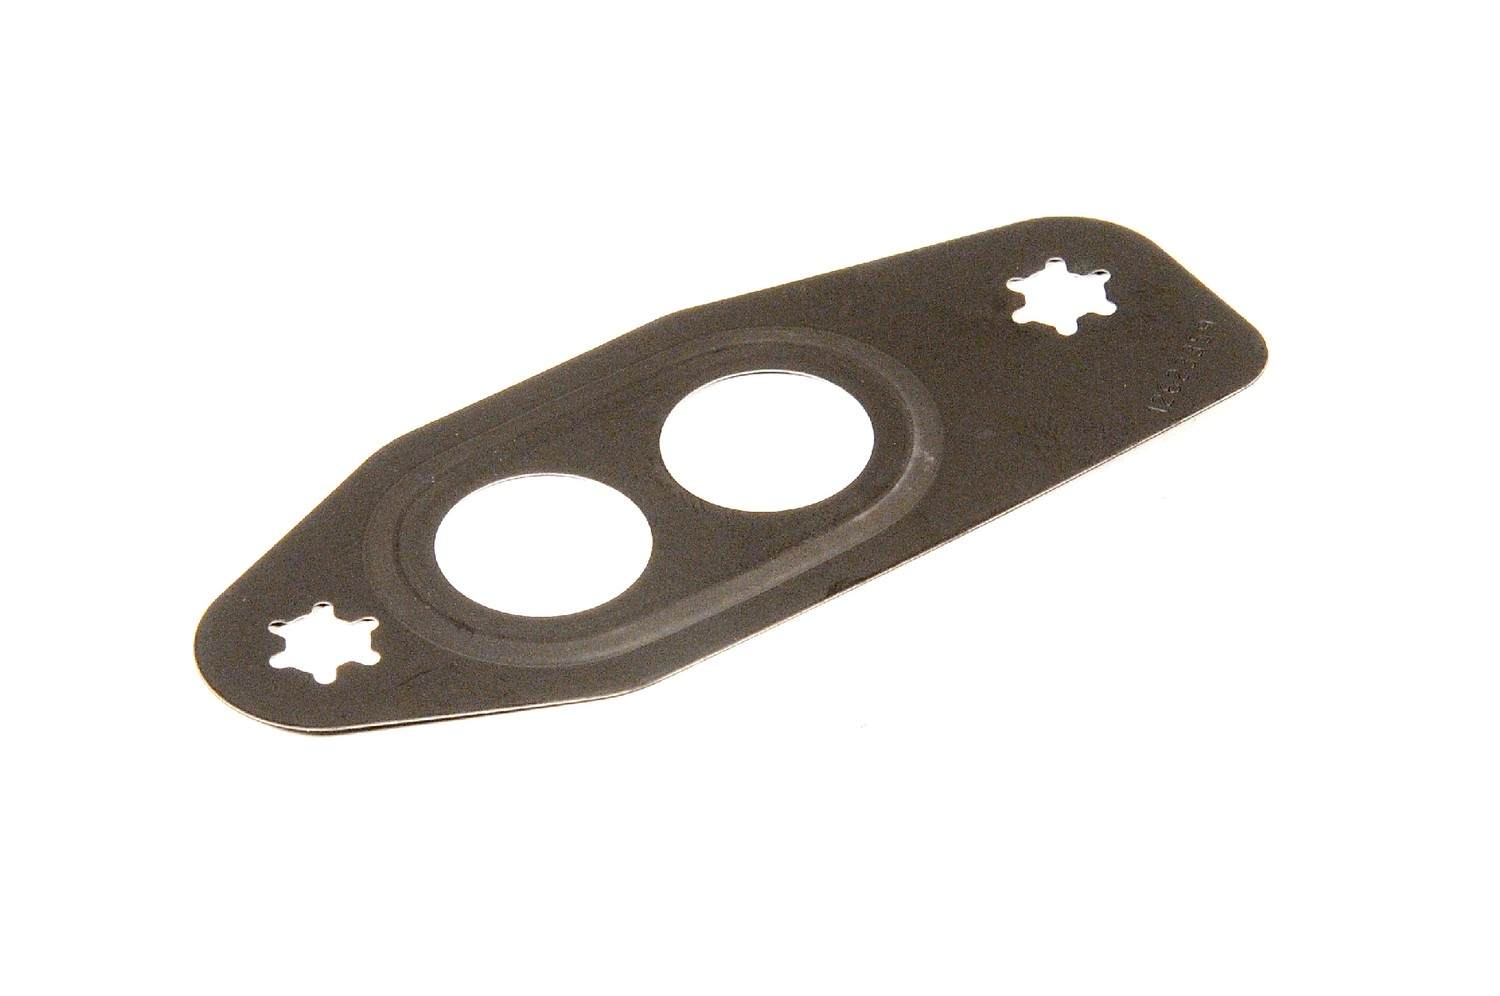 GM GENUINE PARTS - Engine Oil Pan Cover Gasket - GMP 12623359